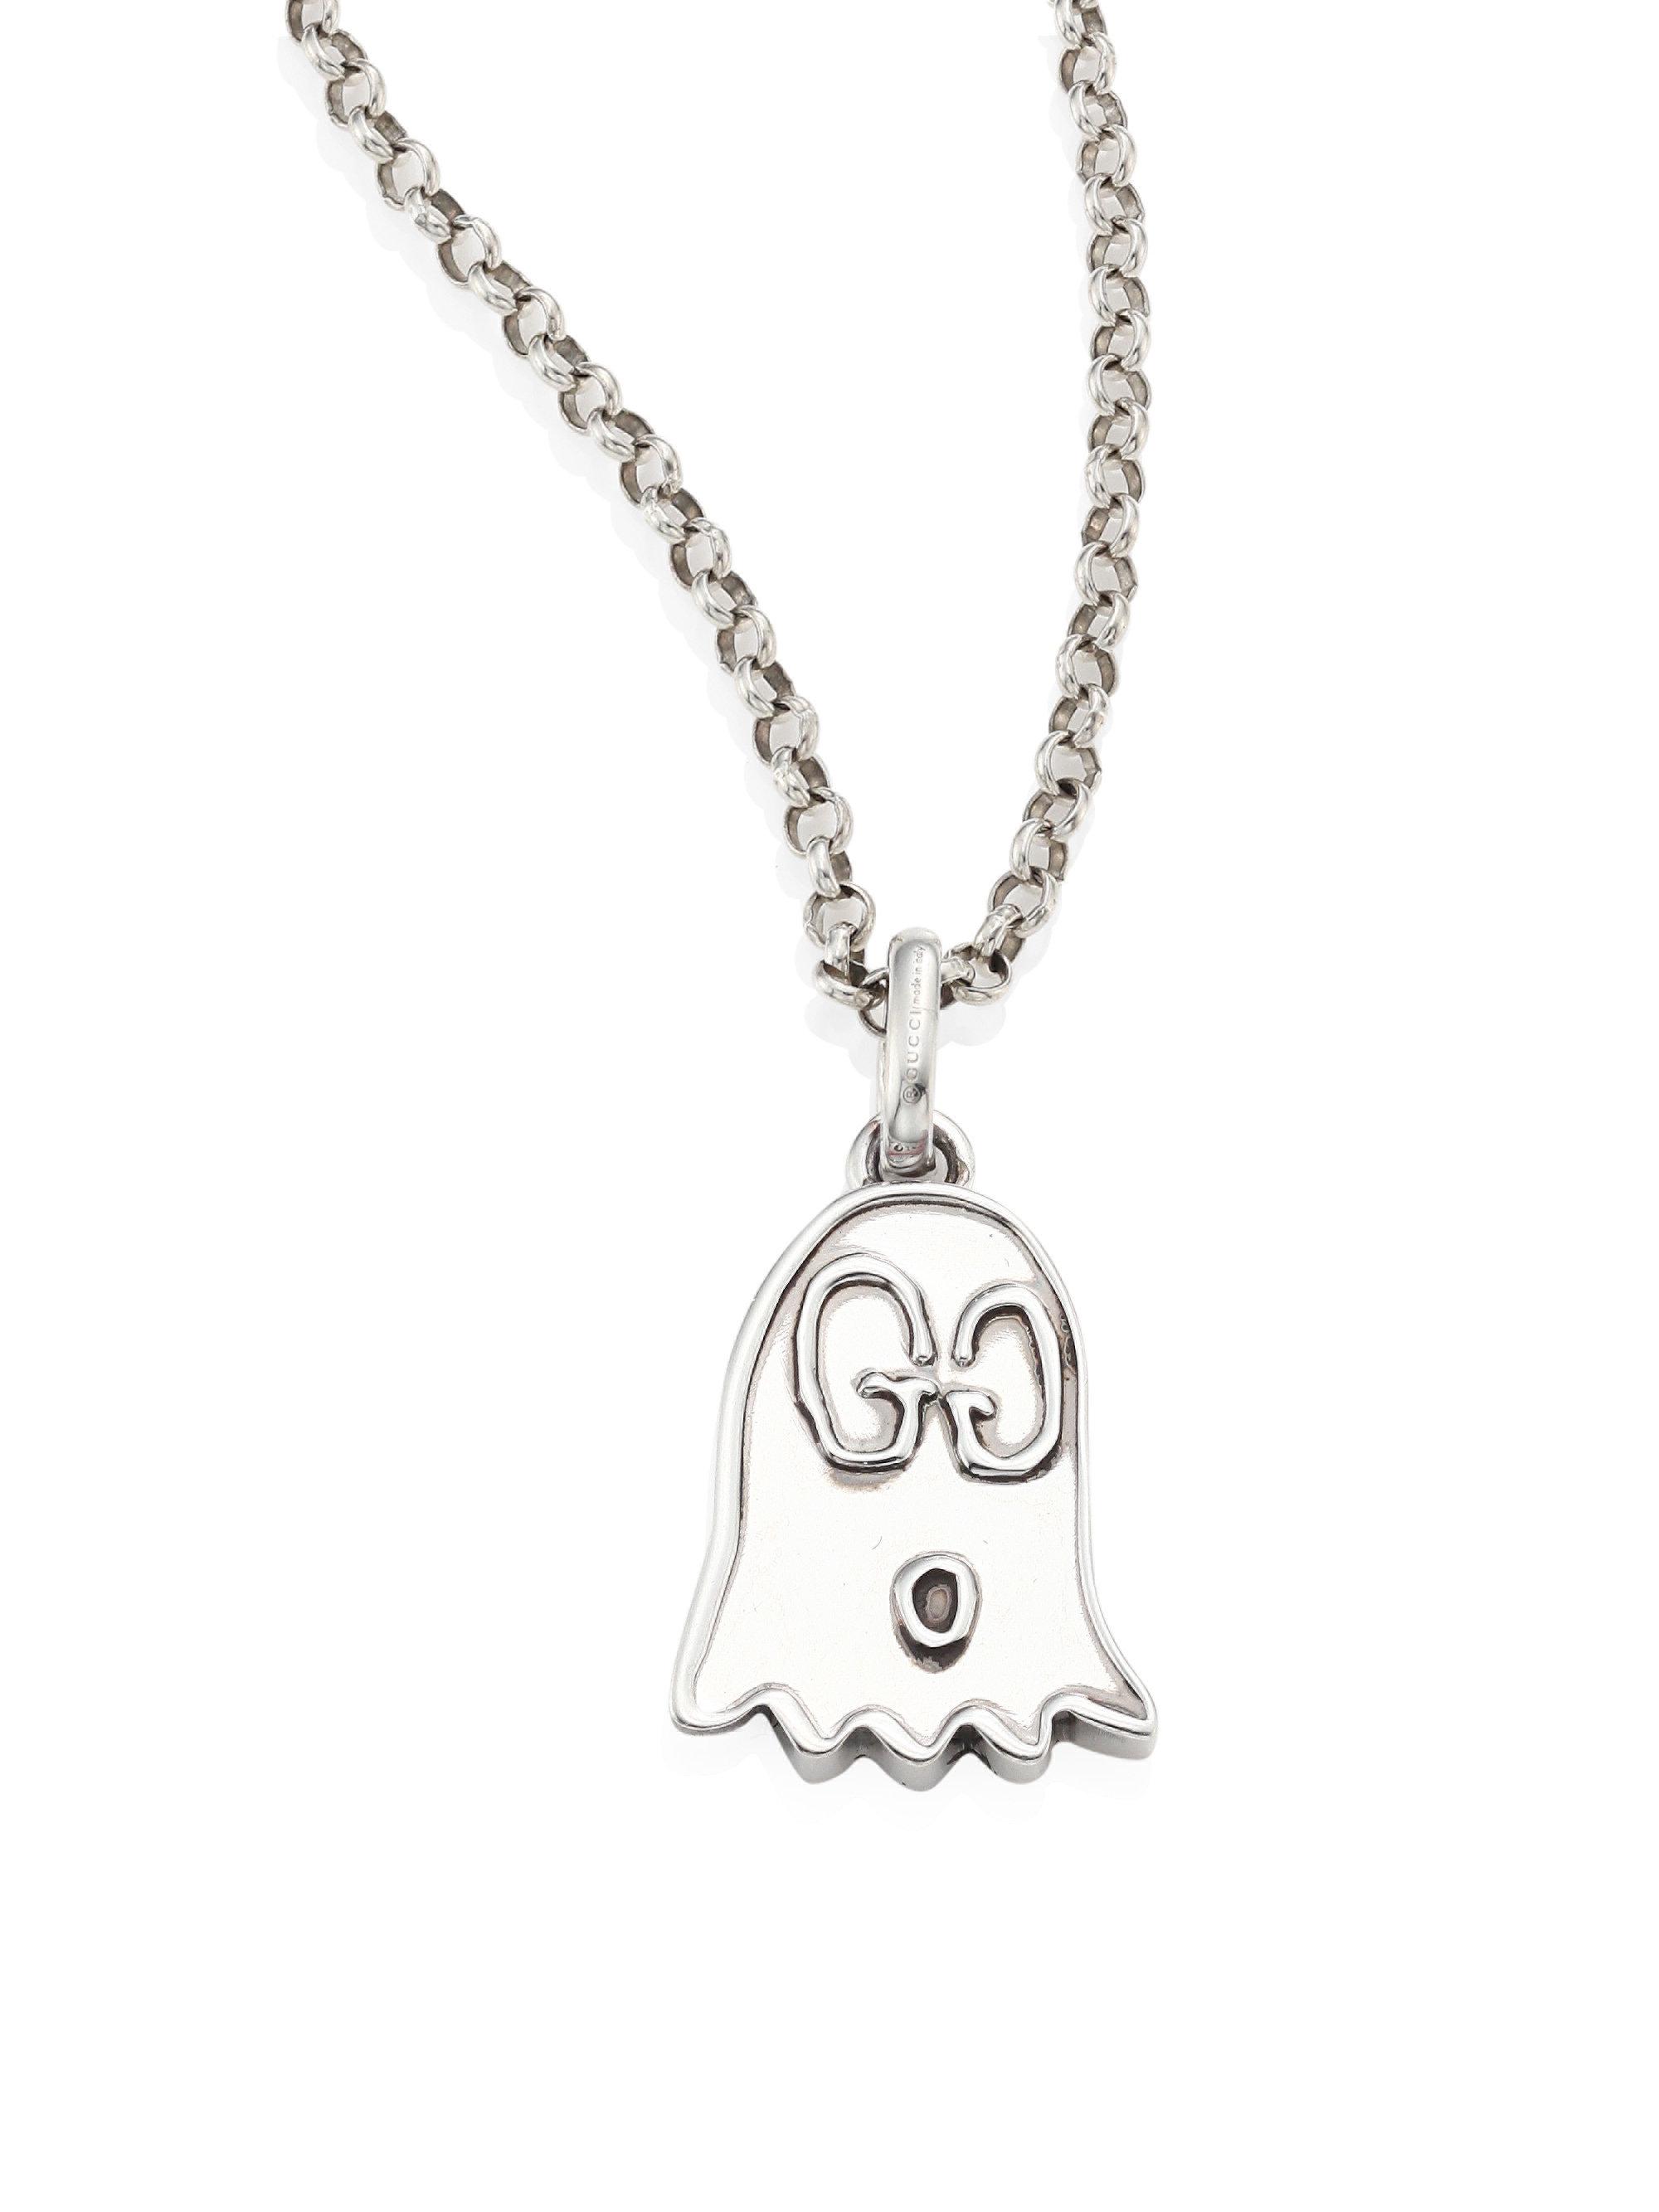 gucci necklace ghost